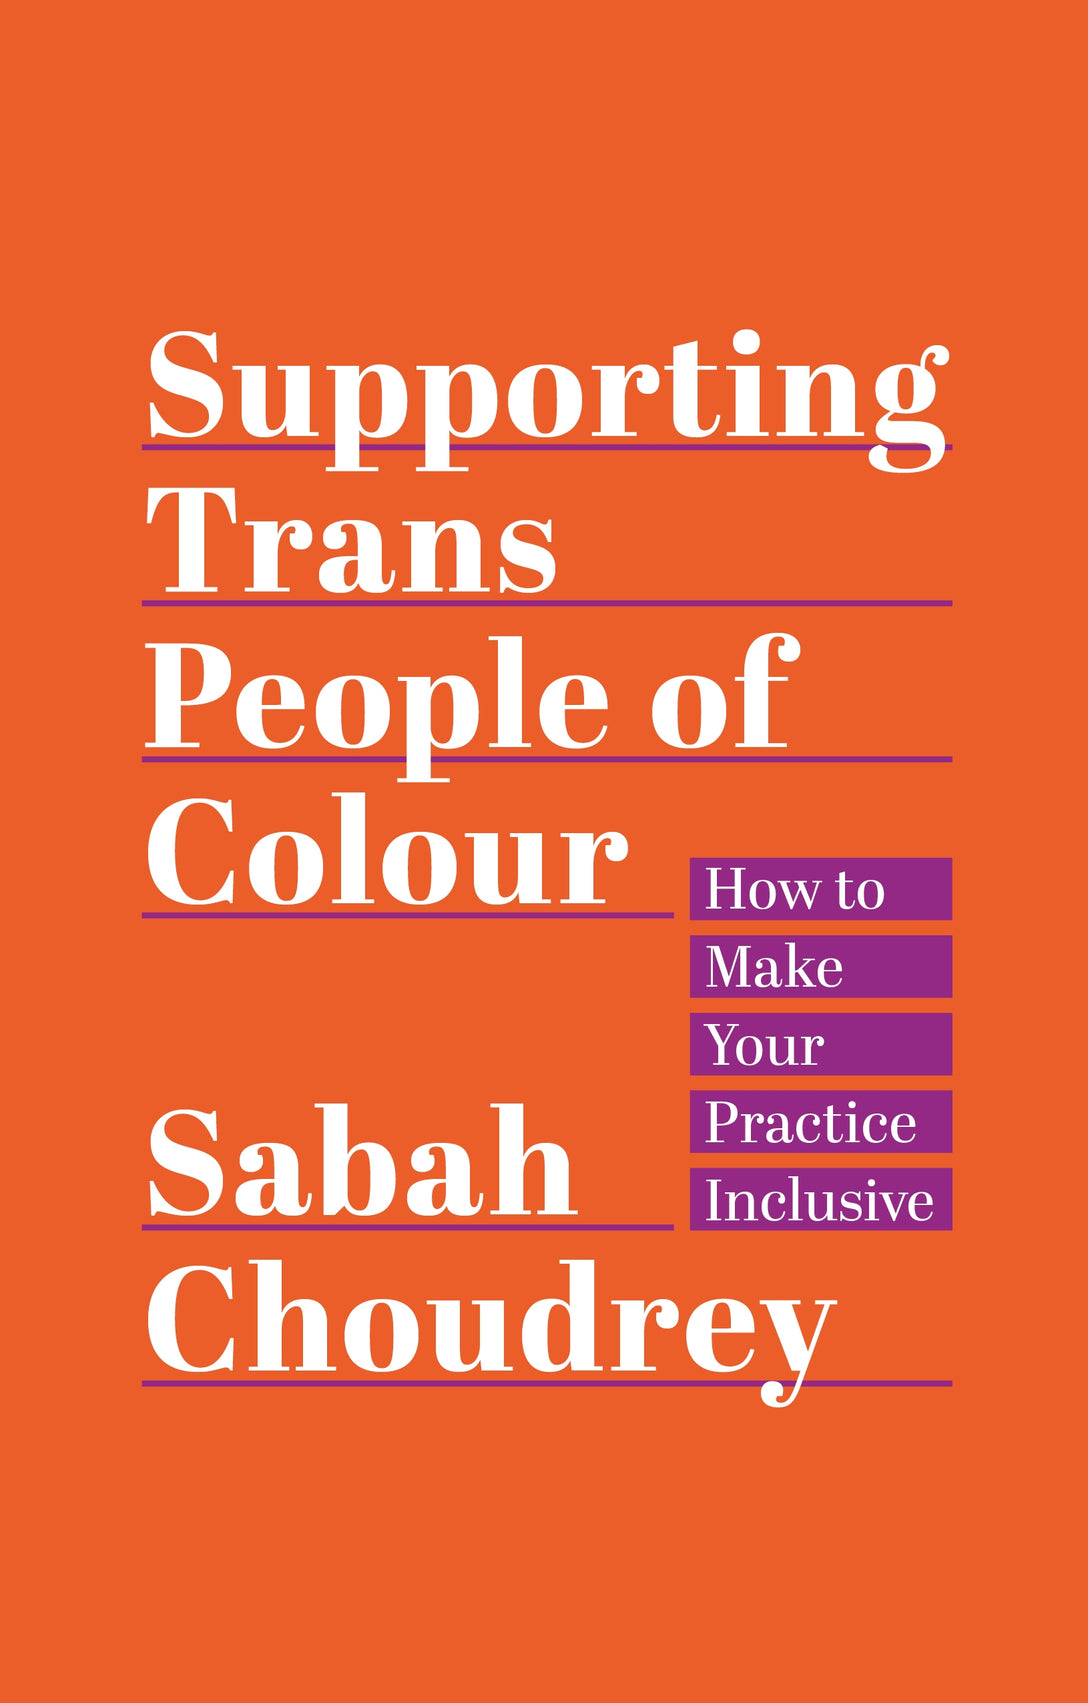 Supporting Trans People of Colour by Sabah Choudrey